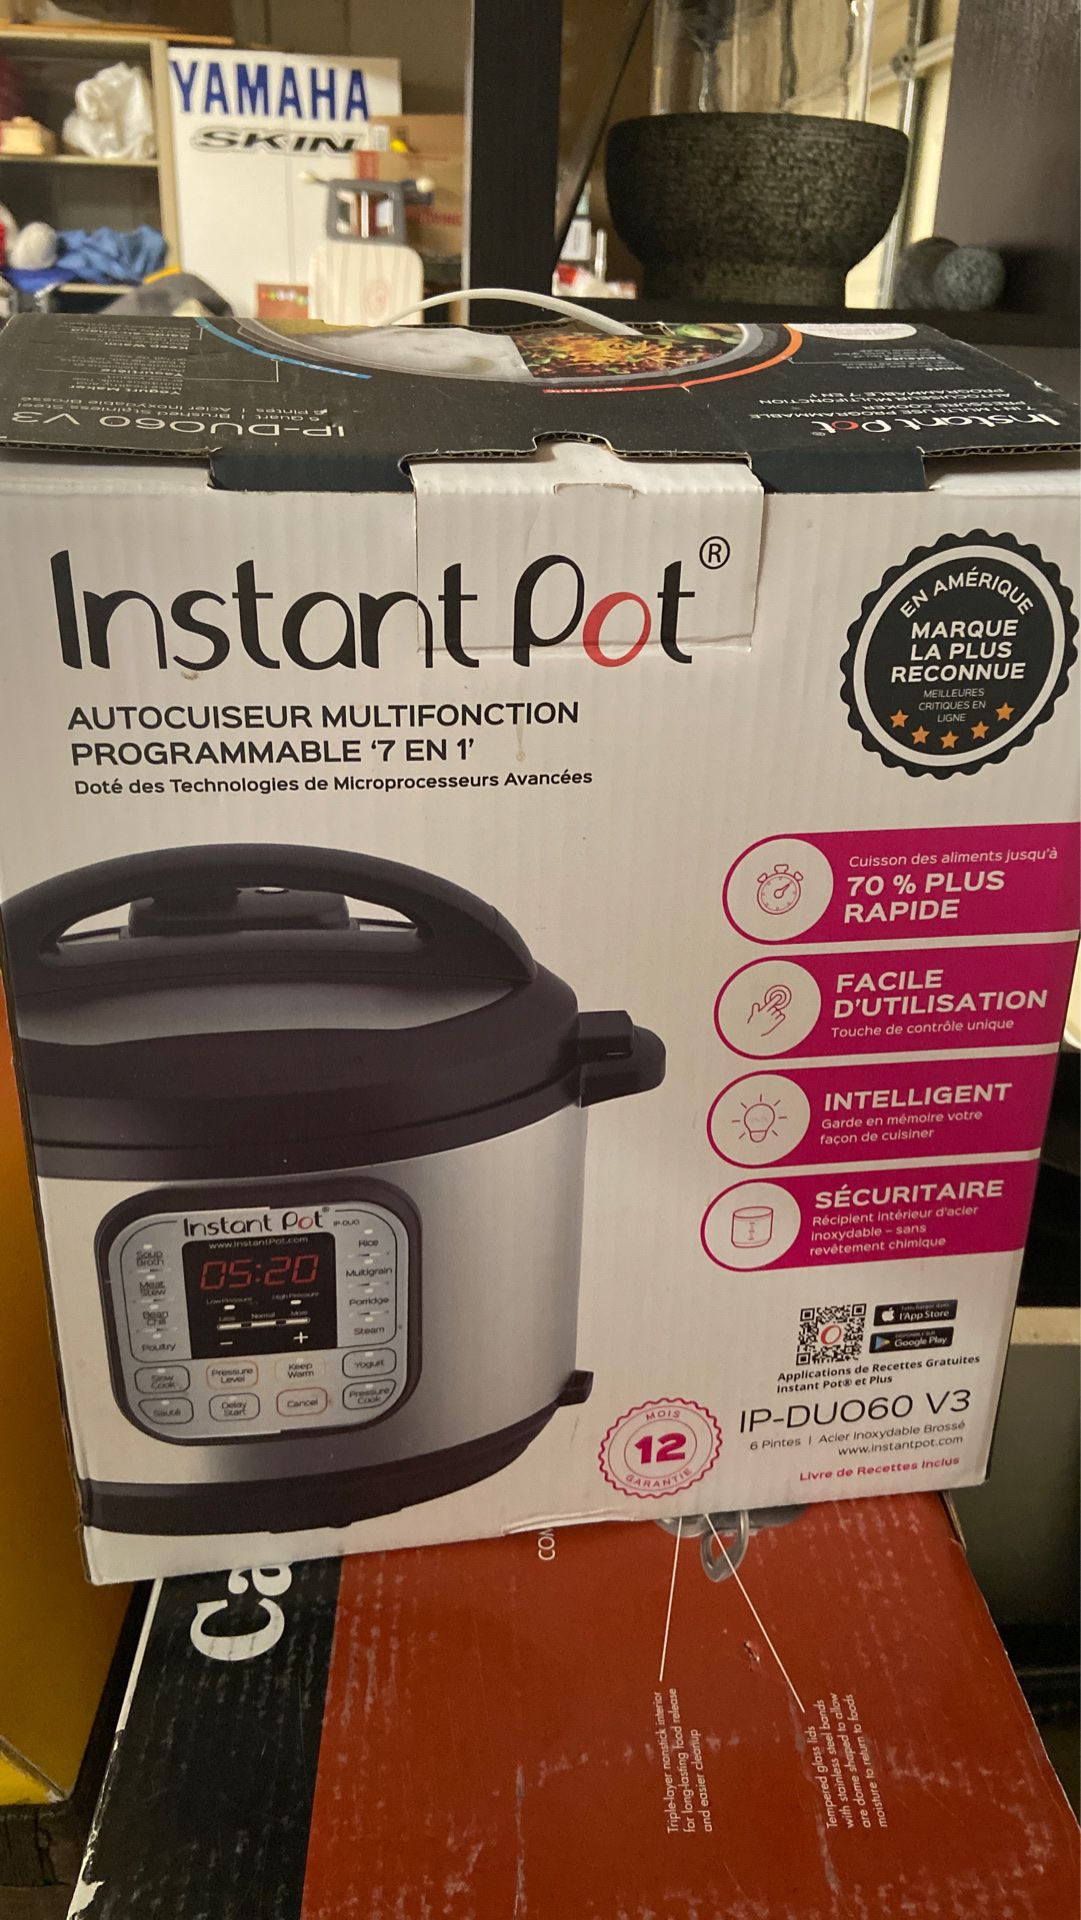 $55 NEW INSTANT POT bought at Costco $79 @ Amazon